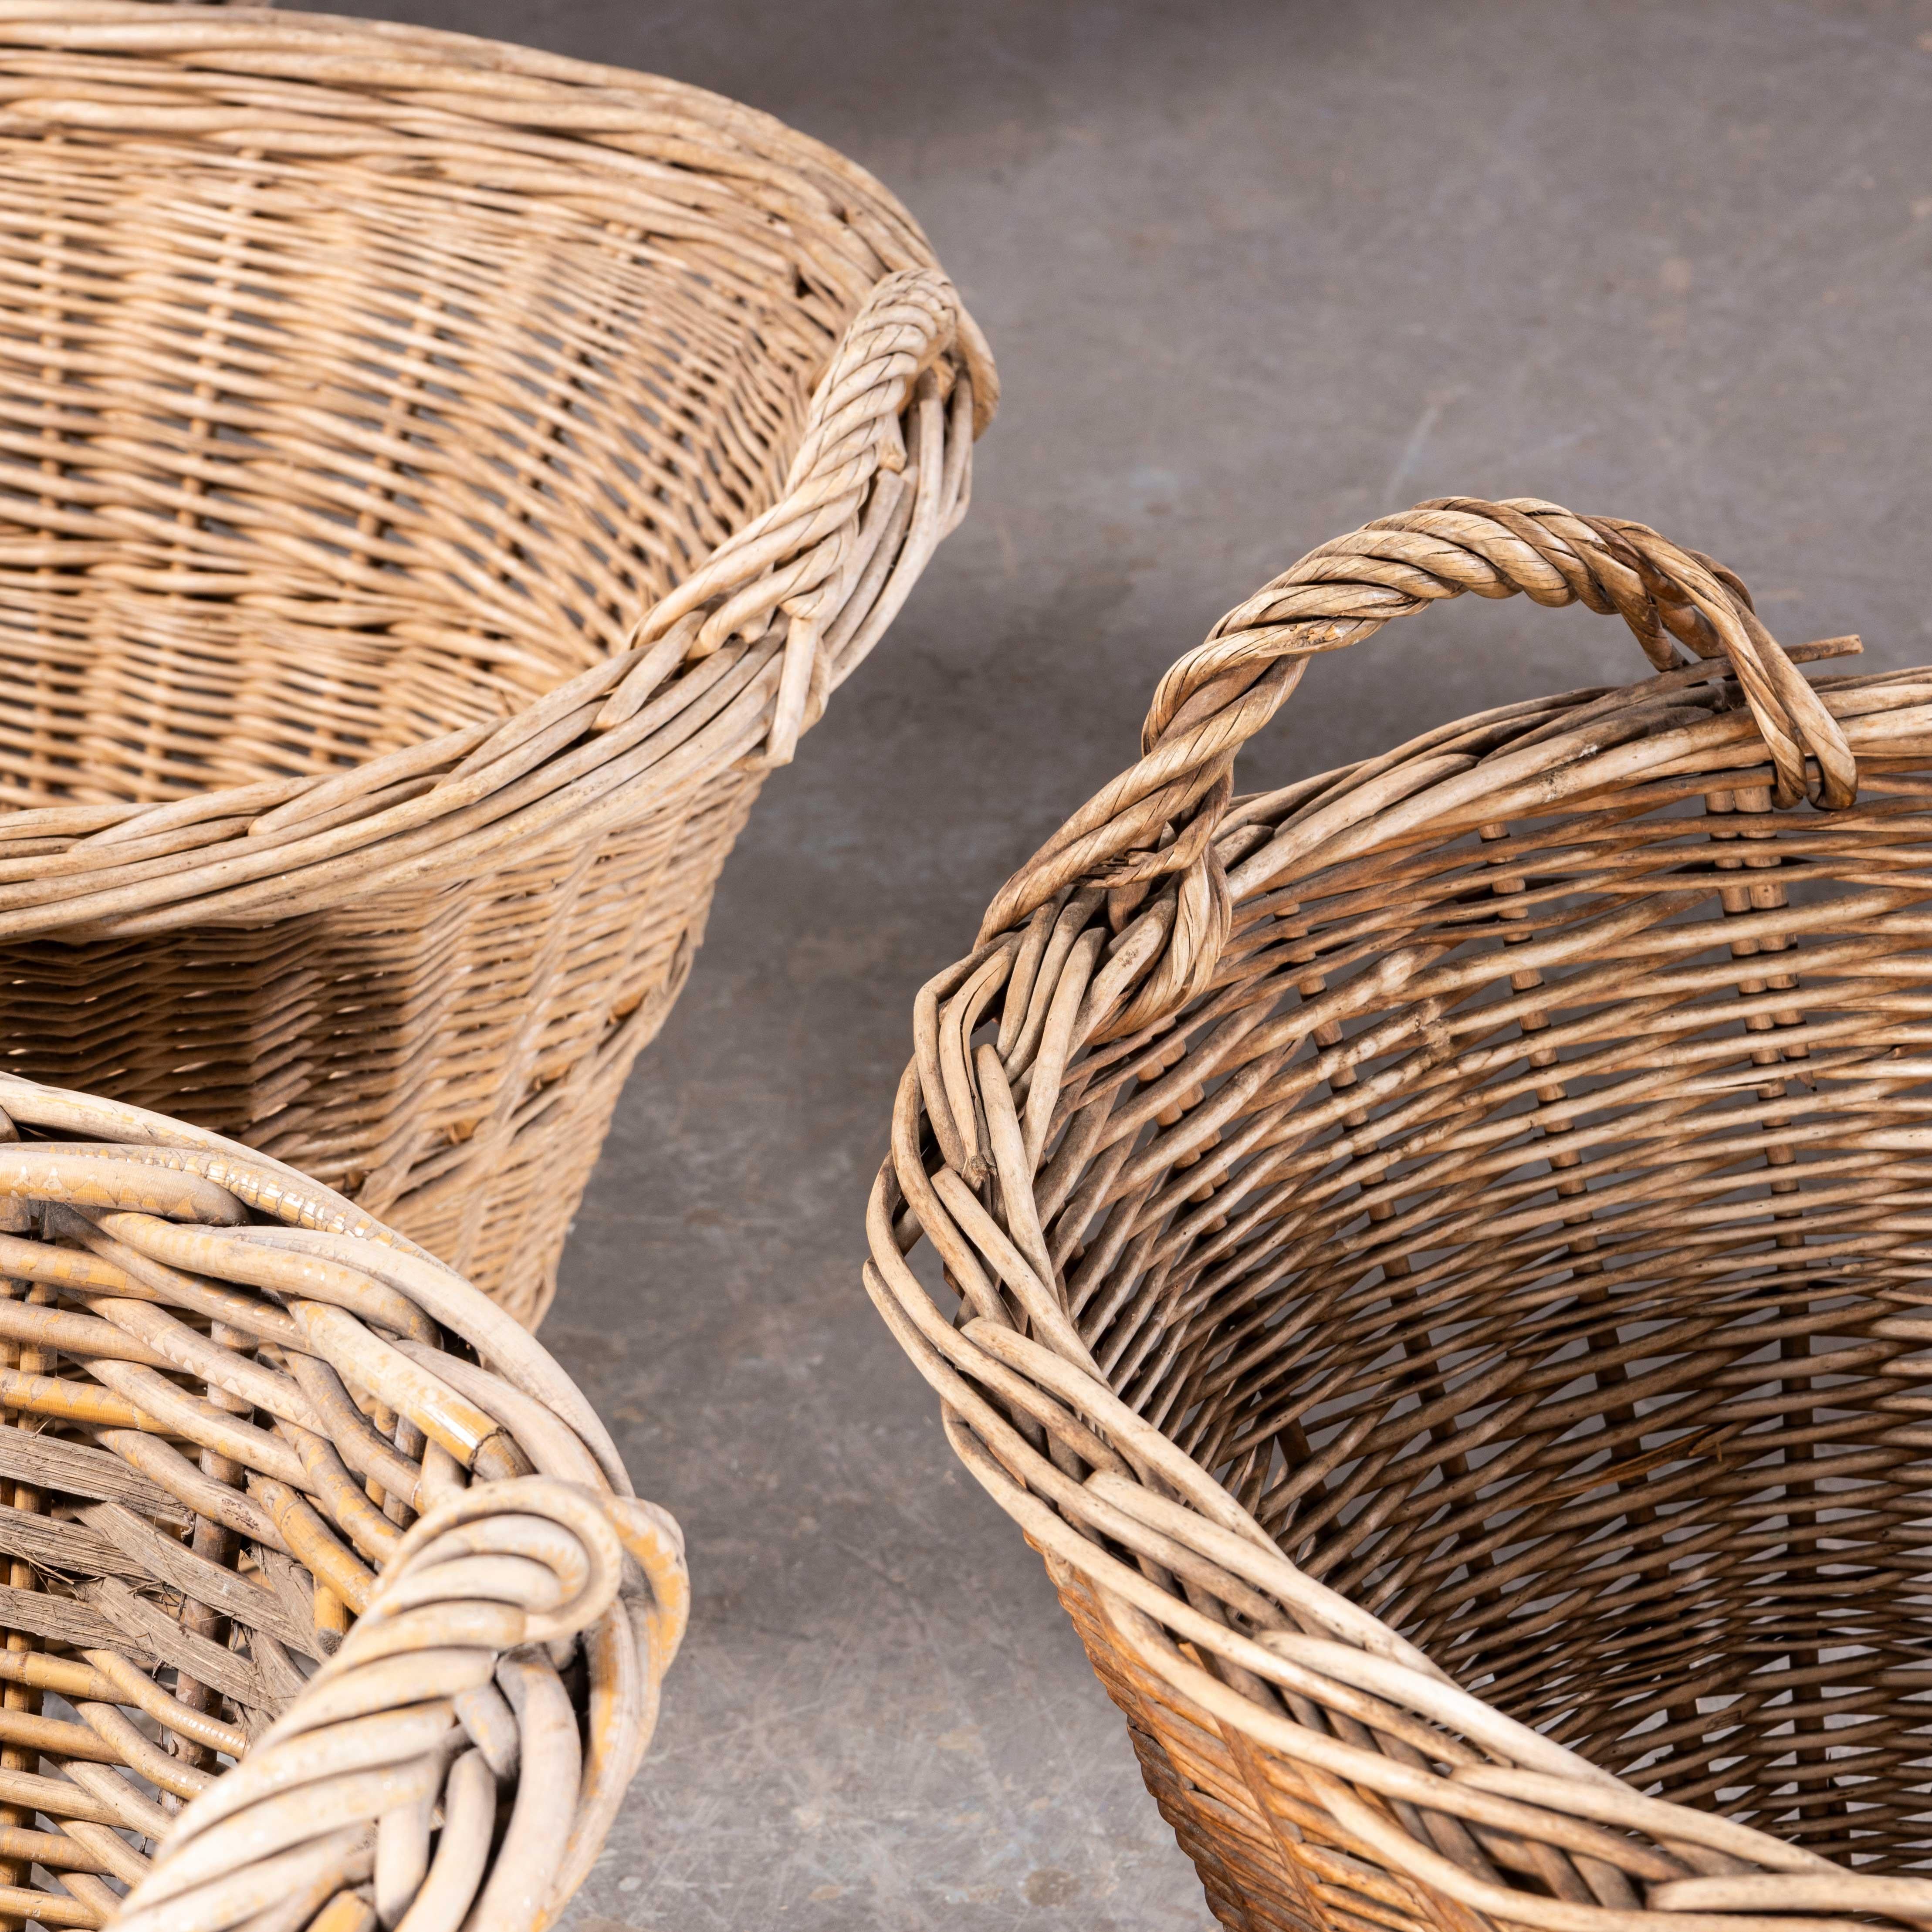 Original French Handmade Oval Willow Baskets For Sale 2